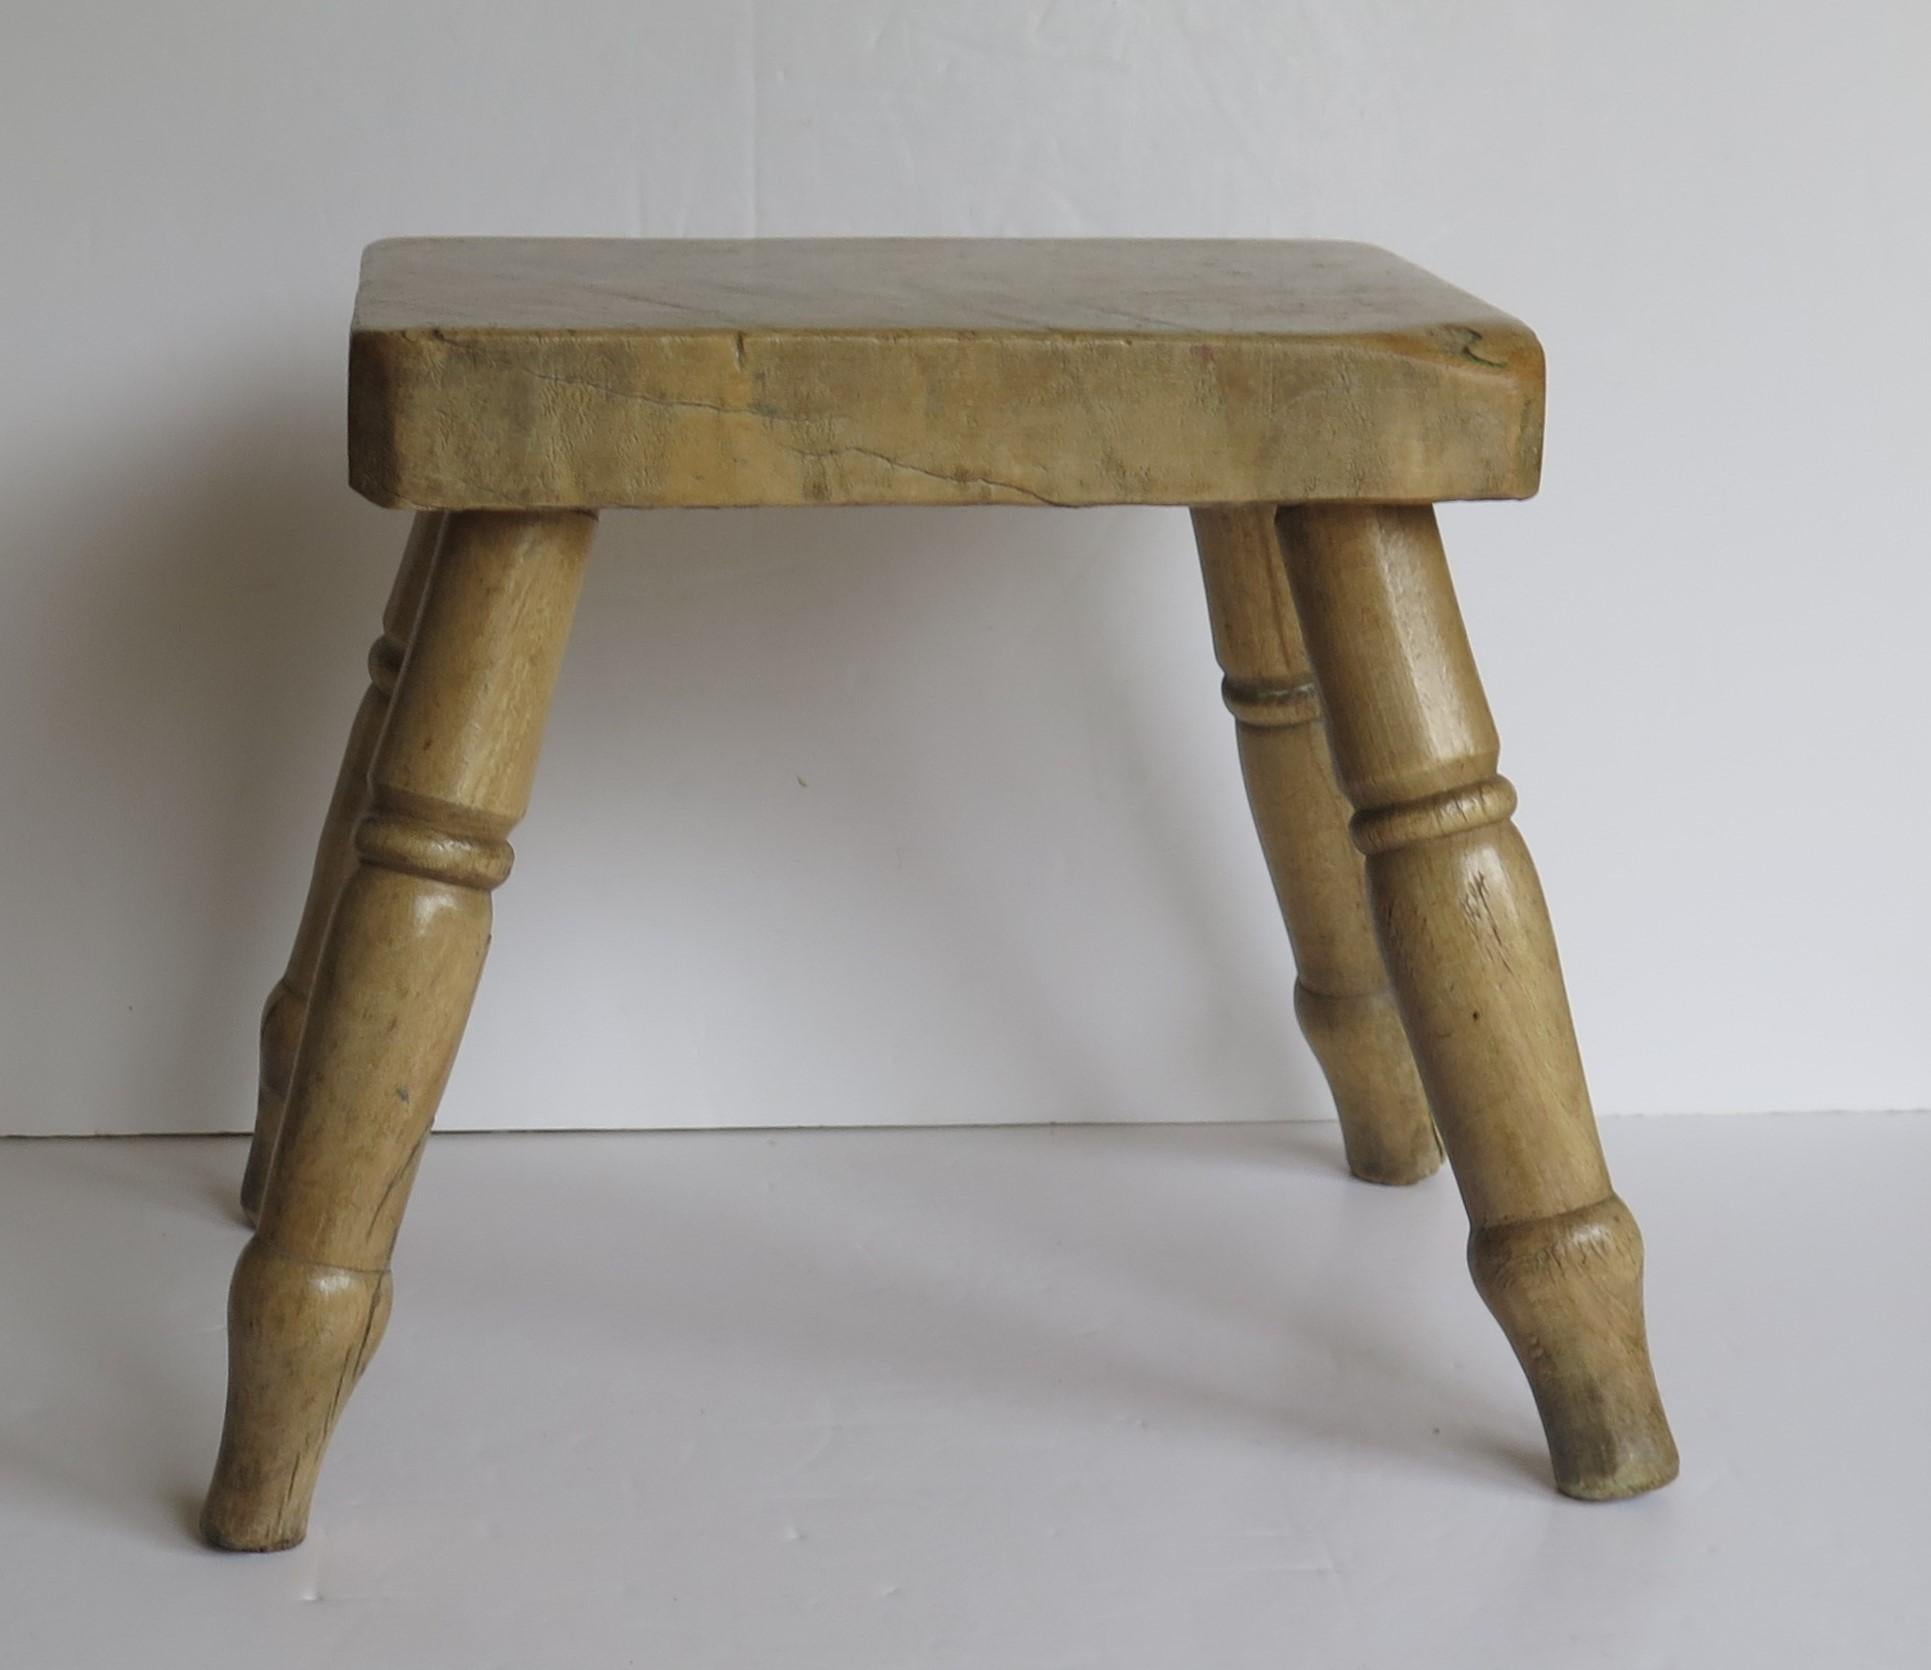 Hand-Crafted Mid 19th Century Country Milking Stool or Stand Solid Sycamore English, Ca 1840